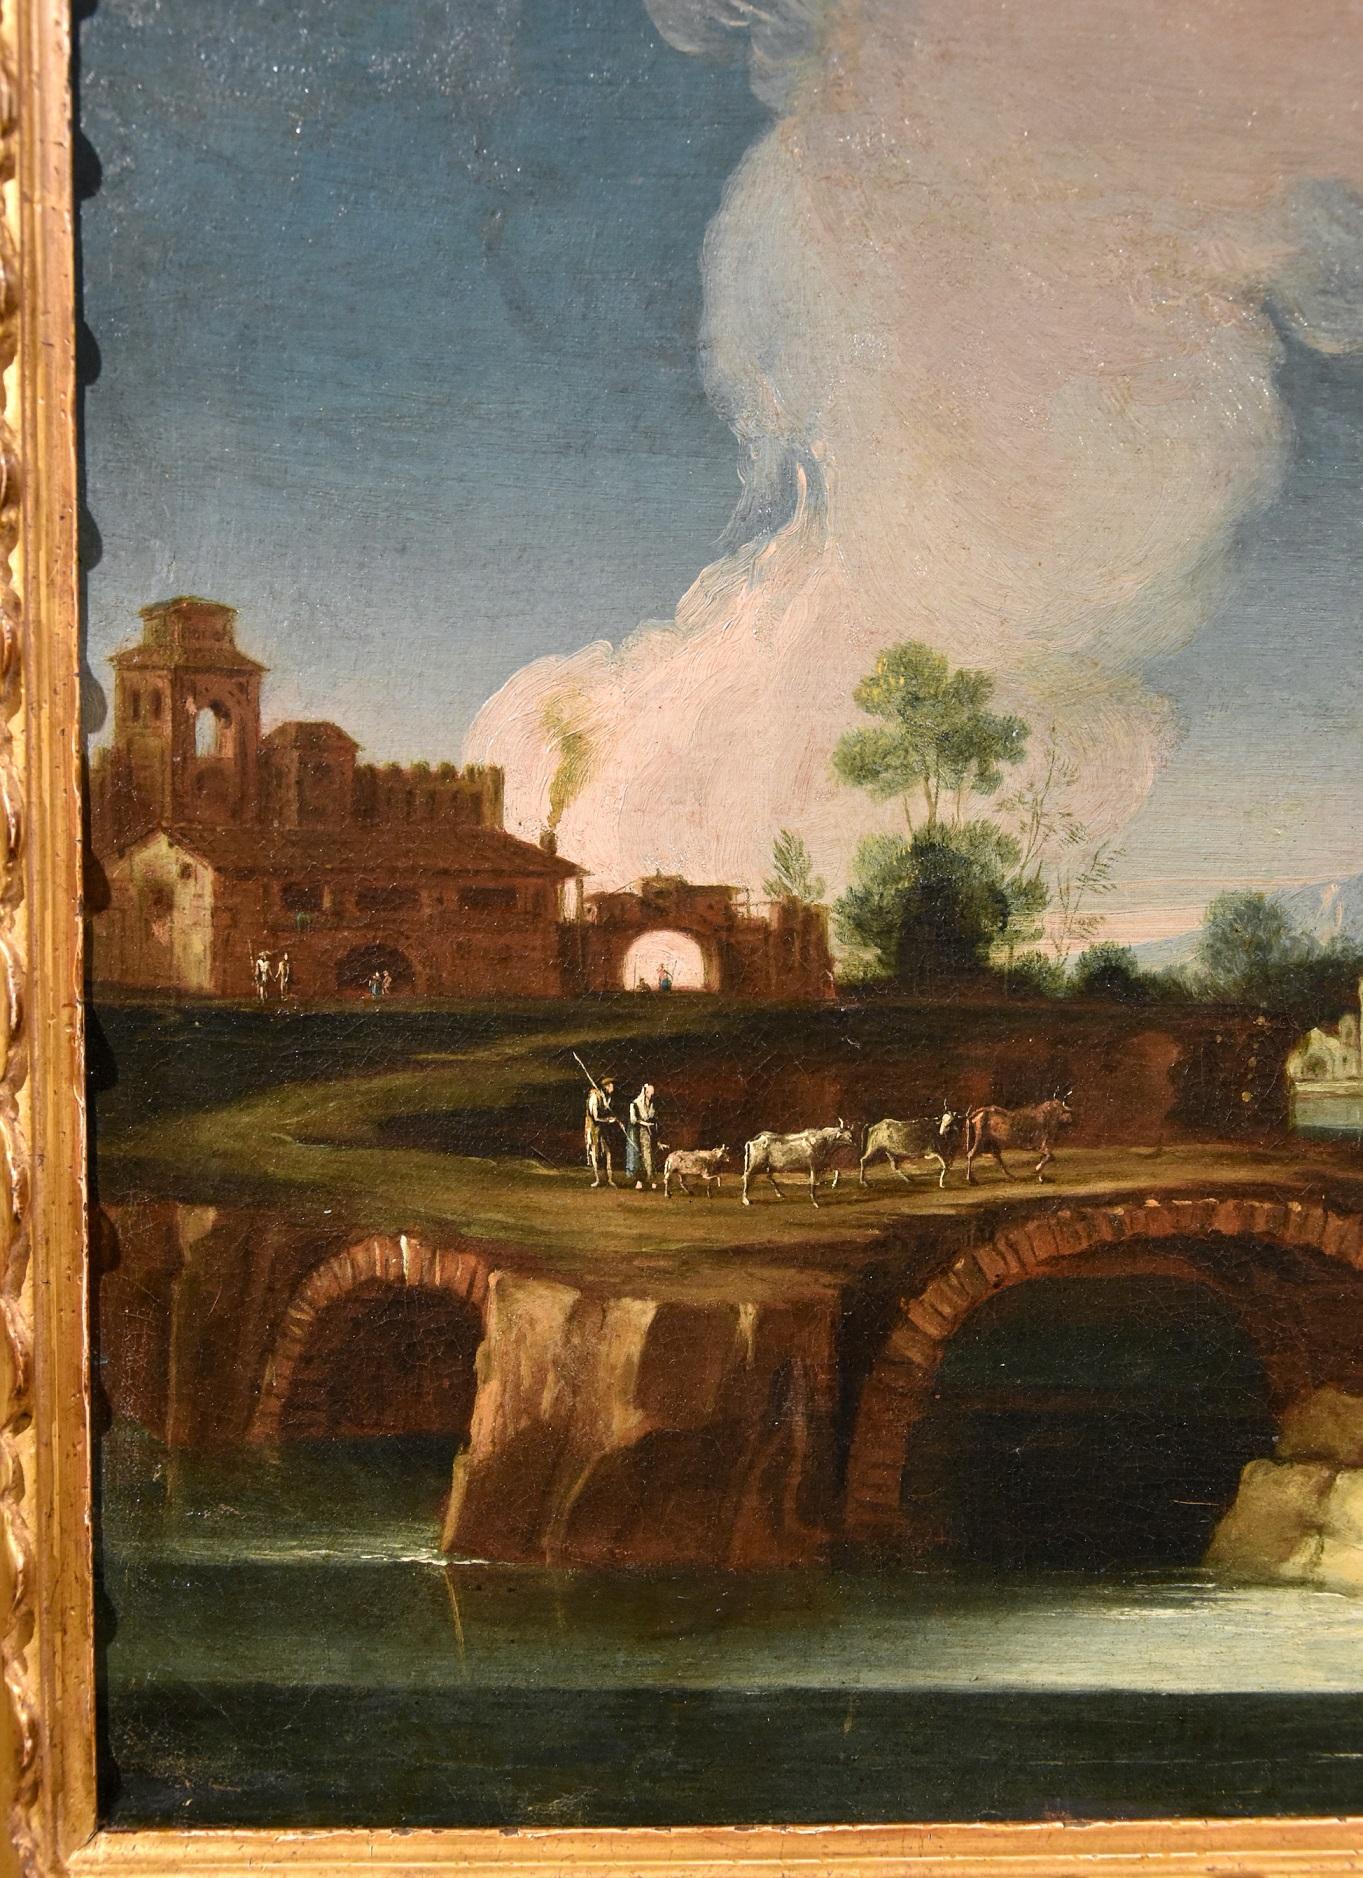 Roman landscape painter of the eighteenth century - Entourage by Paolo Anesi (Rome 1697 - 1773)
River landscape of the Lazio countryside, with the Tiber flowing between some villages and a ruined arch

II half XVIII century
oil on canvas, (cm.) 37 x